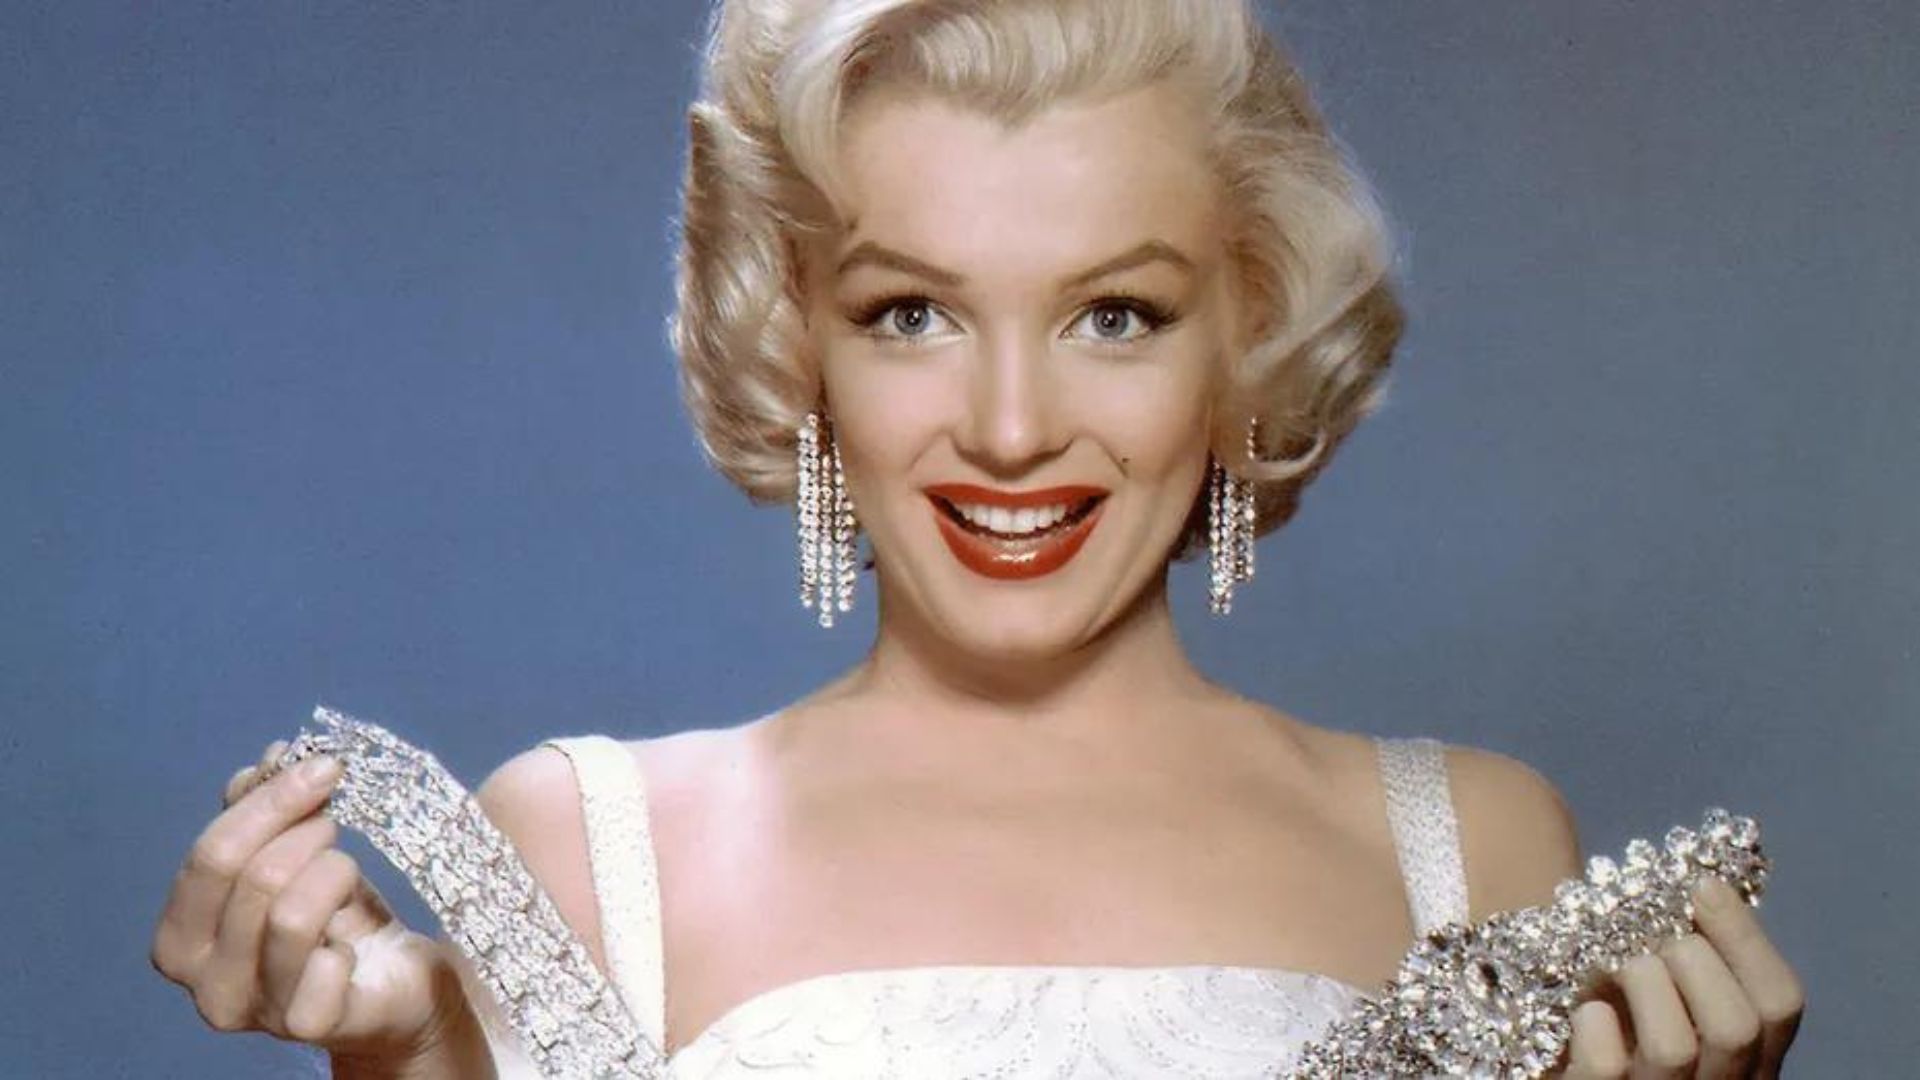 Marilyn Monroe Smiling And Wearing White Dress